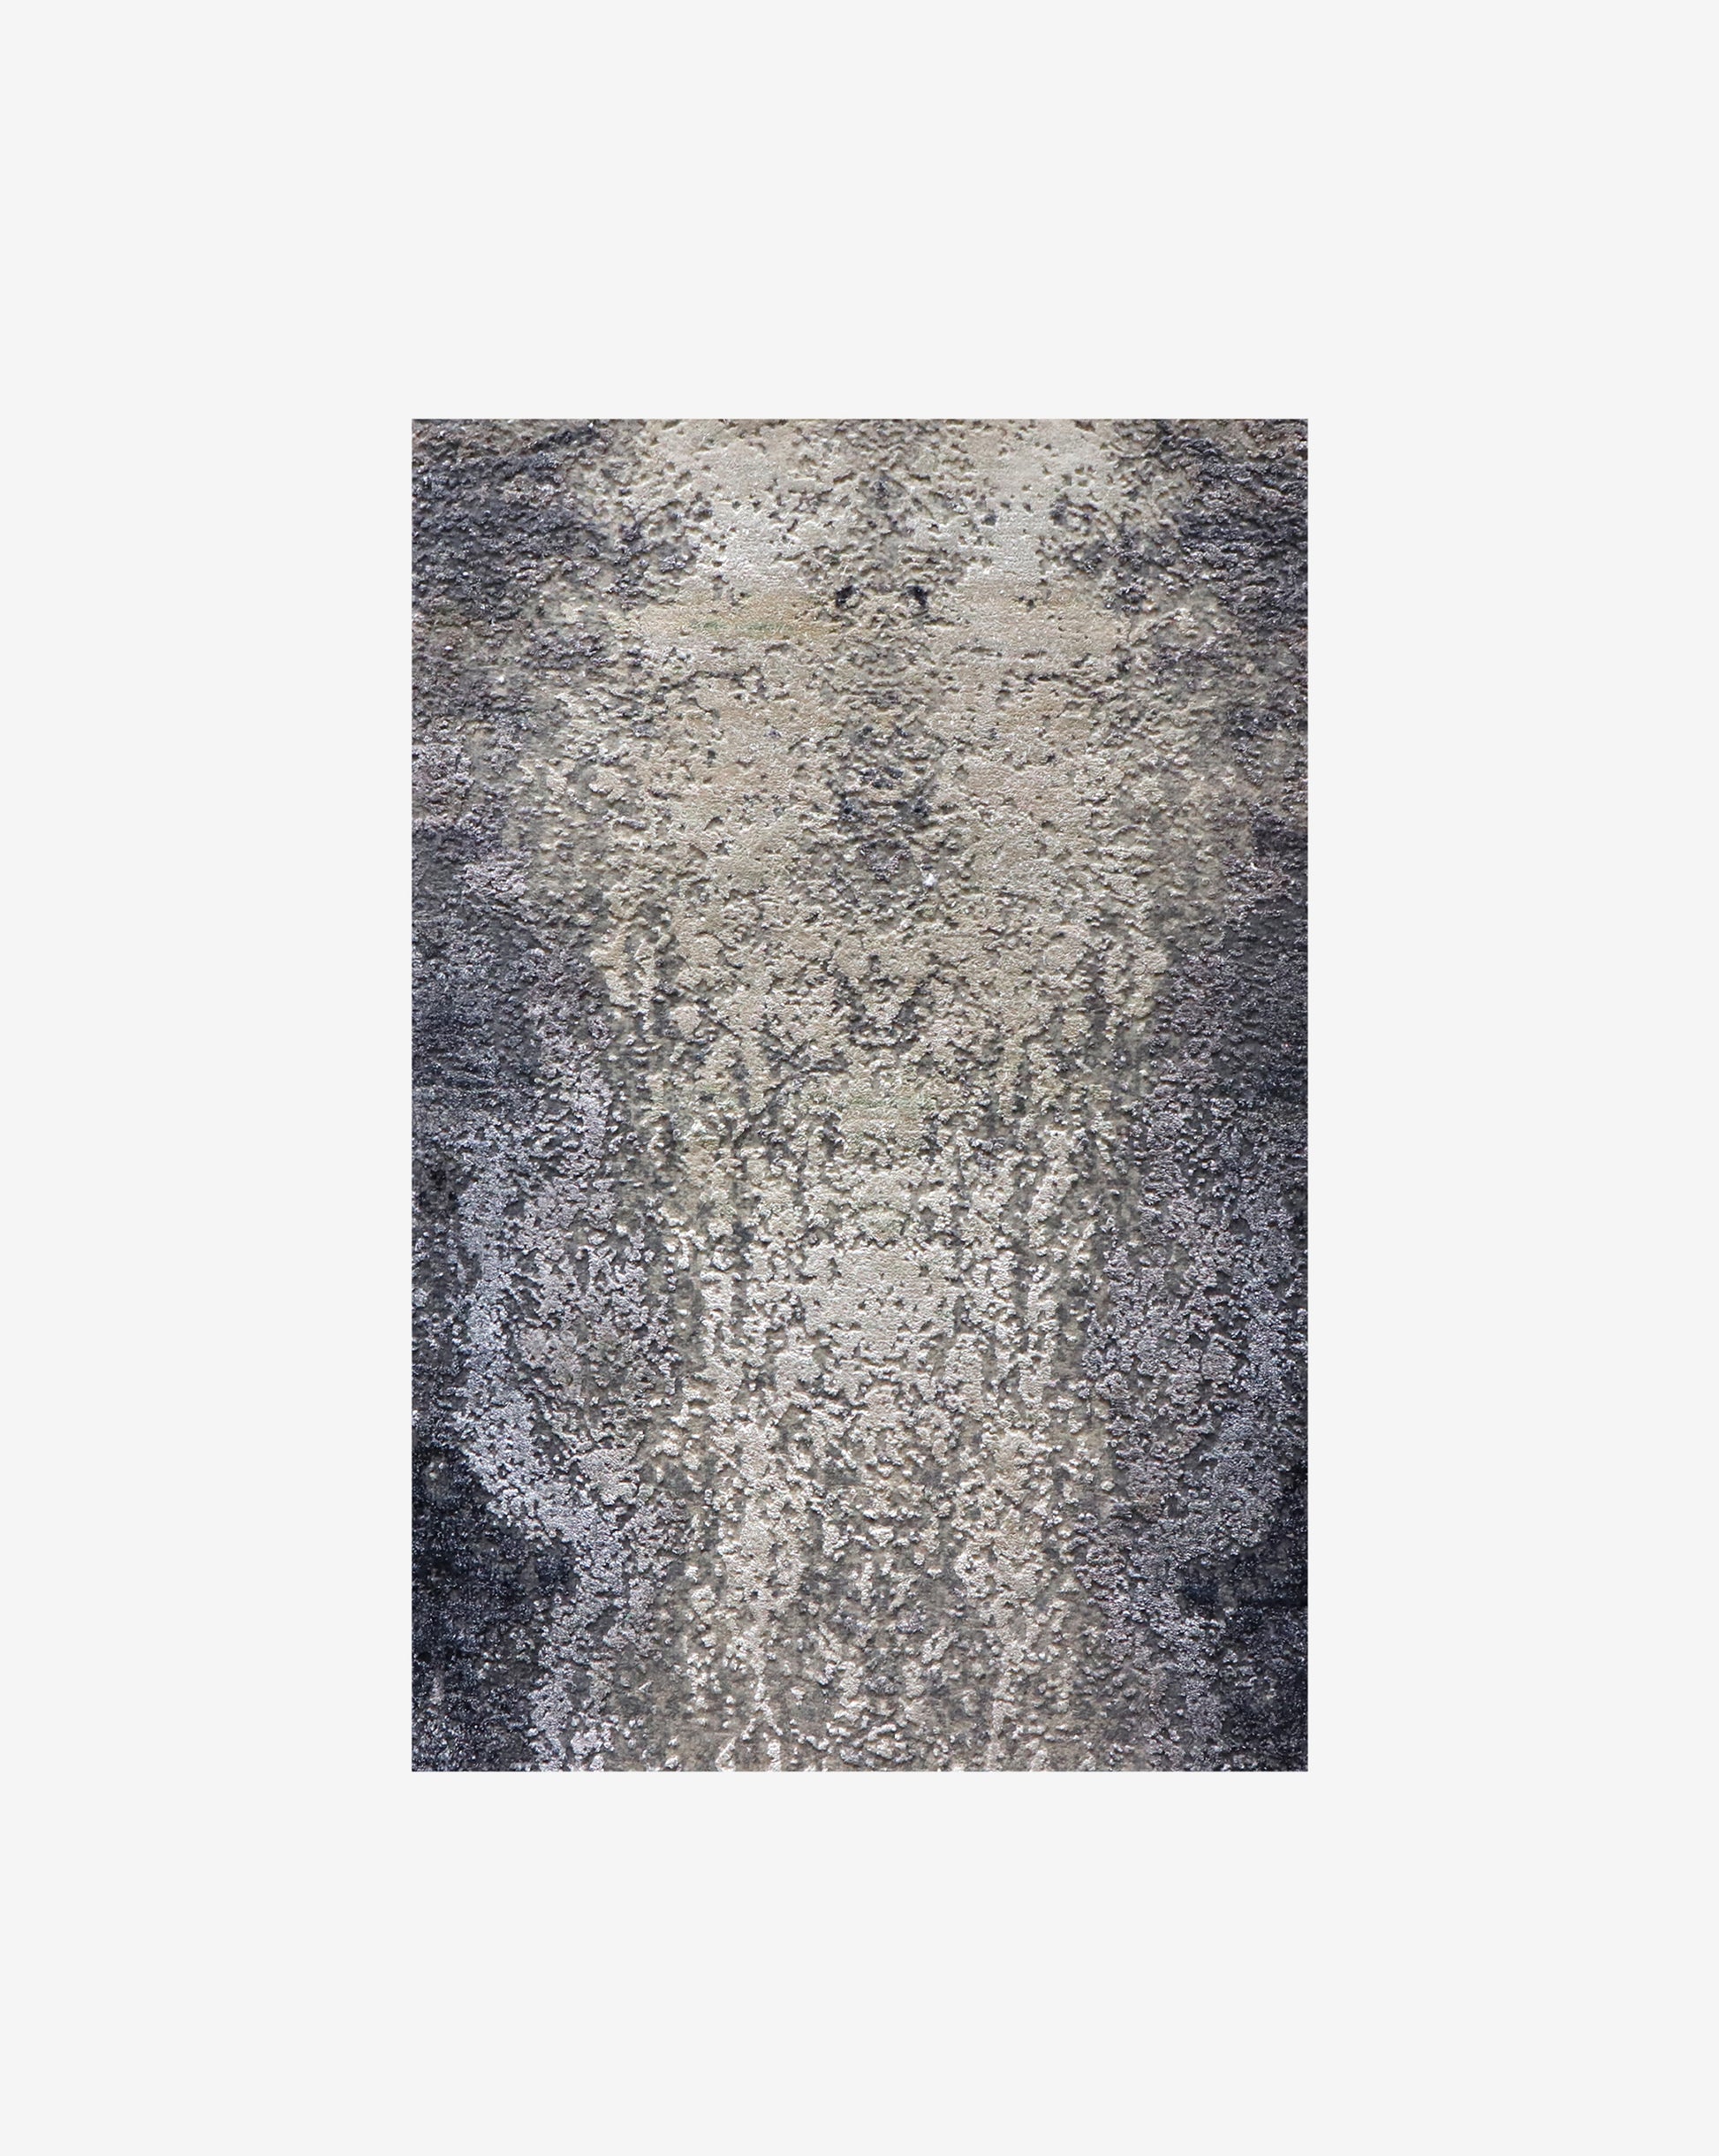 An Akimbo 7 Persian Knot Rug 2' x 3'  Greyscale on a white background